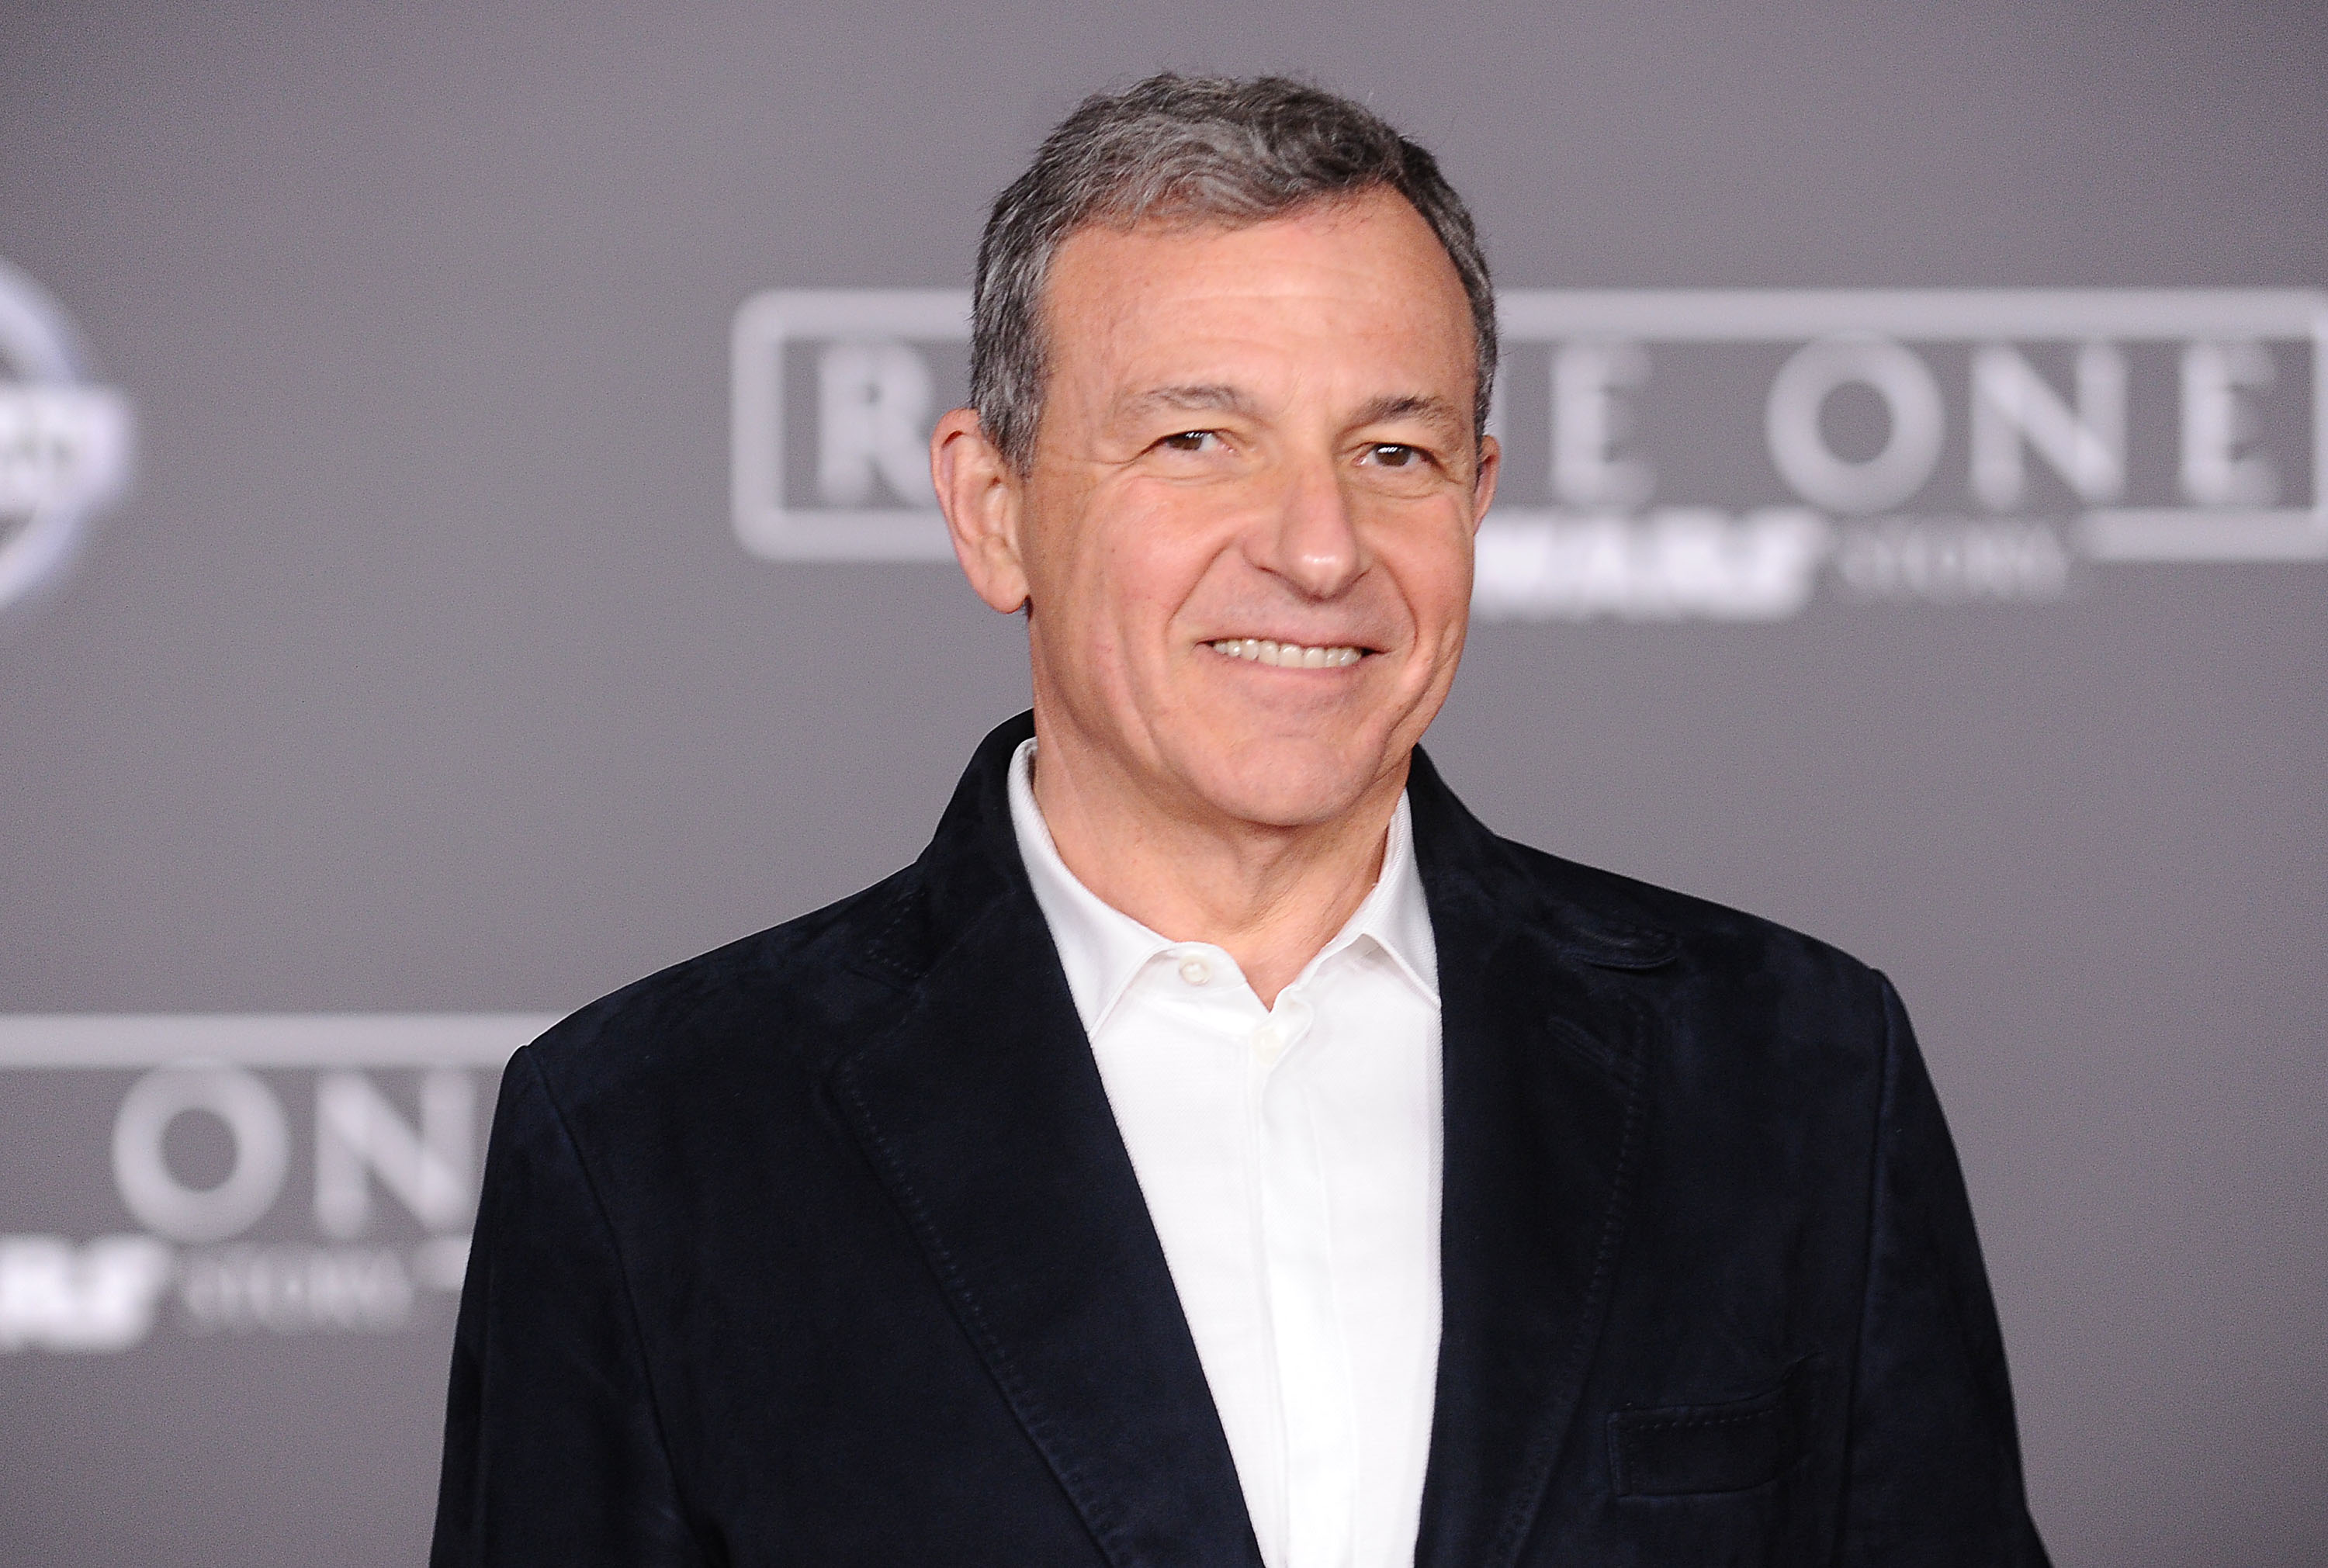 Bob Iger attends the premiere of "Rogue One: A Star Wars Story" at the Pantages Theatre on Dec. 10, 2016 in Hollywood, California. (Jason LaVeris—FilmMagic/Getty Images)